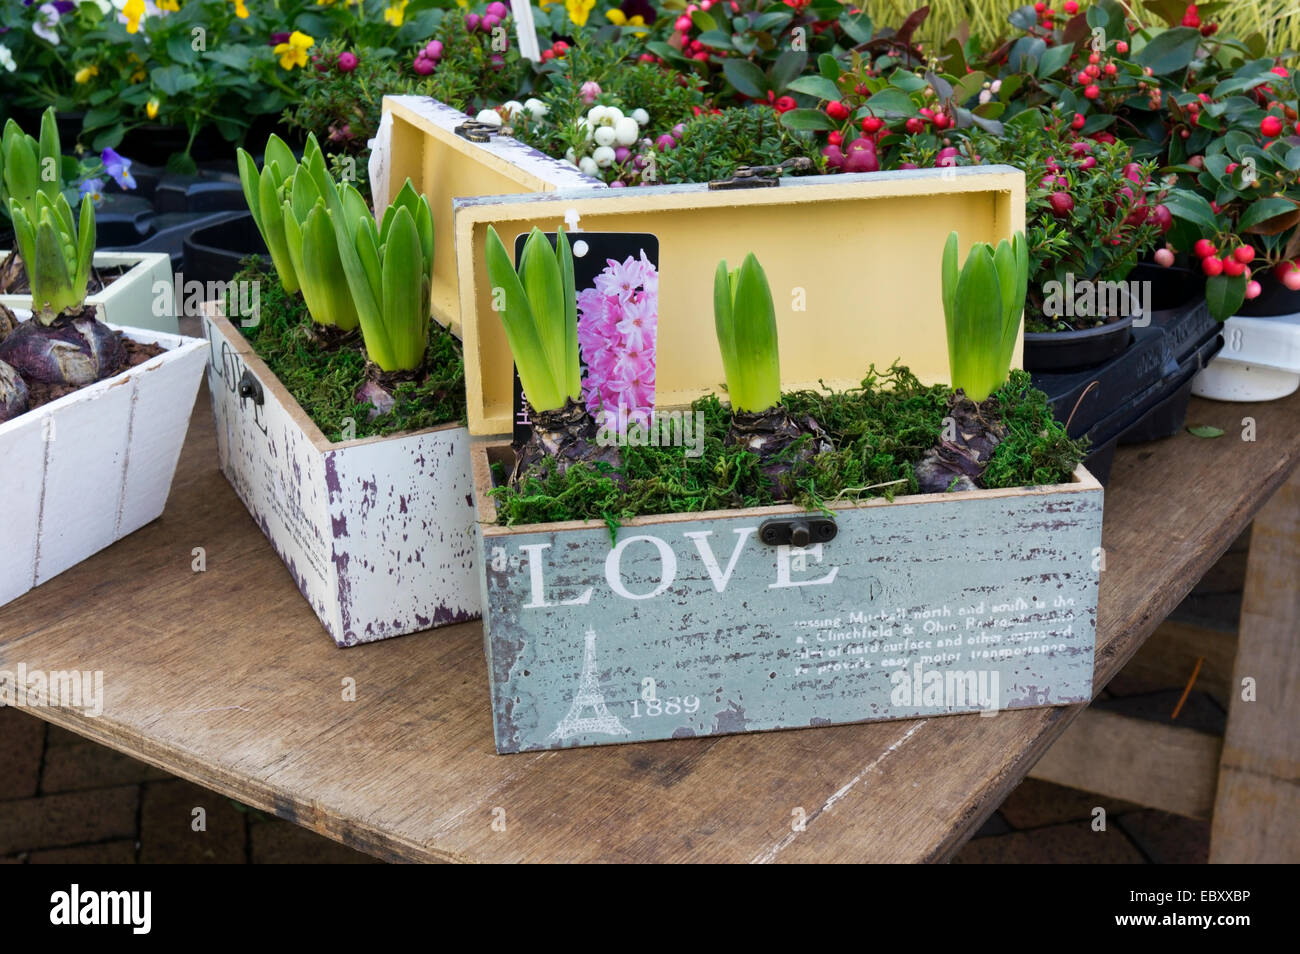 Hyacinths on a market flower stall packed in presentation boxes to display or give as gifts. Stock Photo